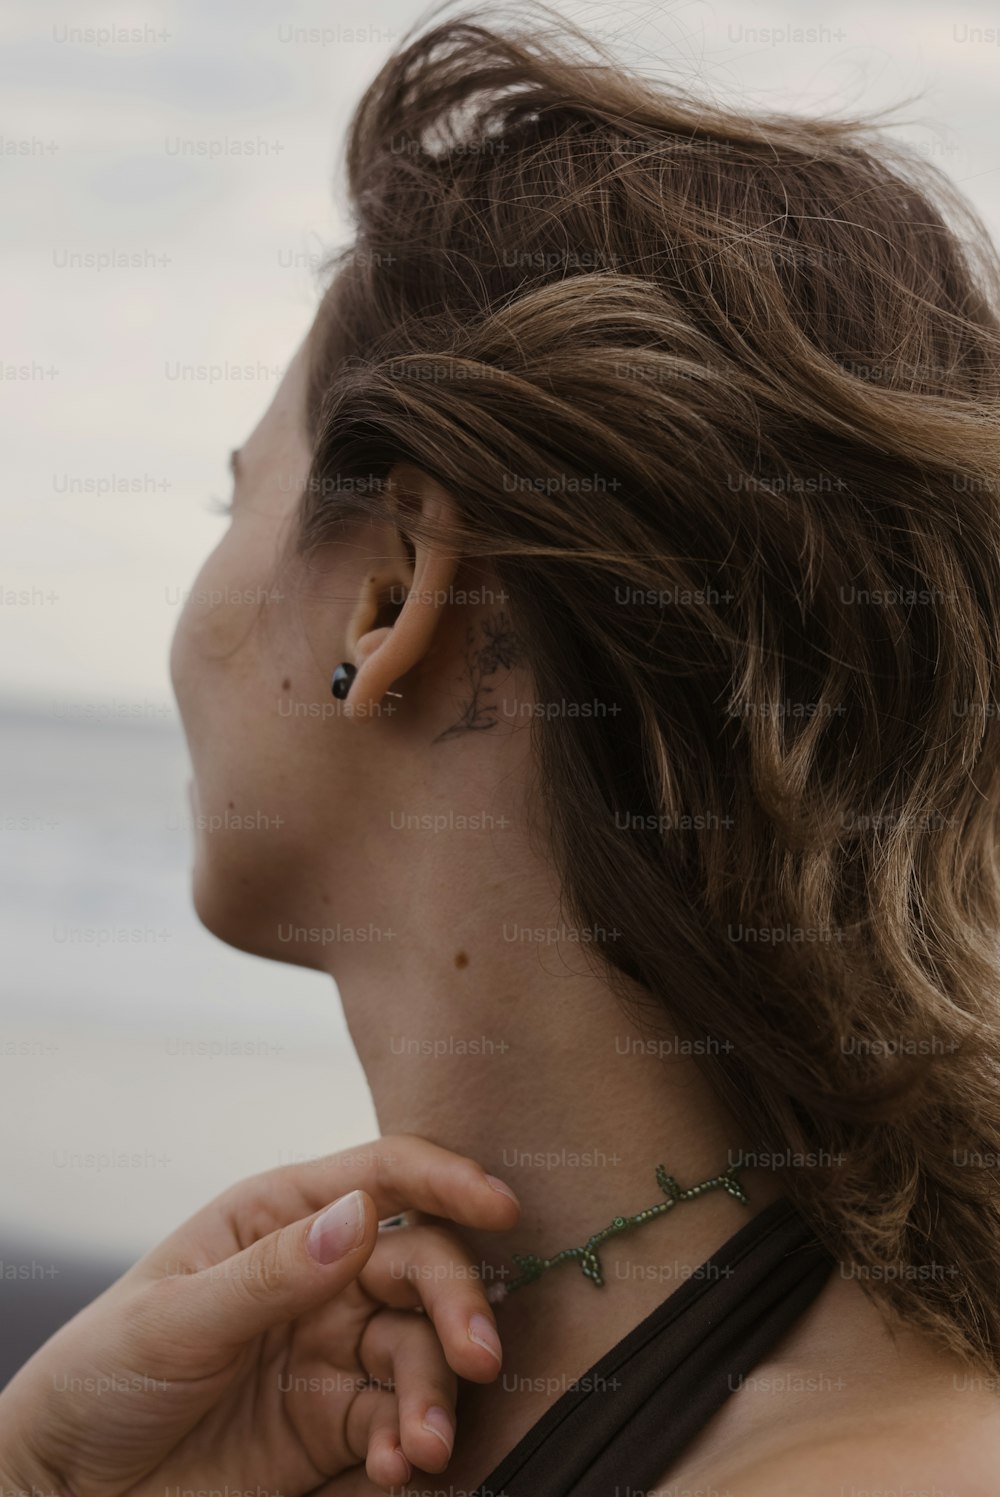 a woman with a piercing in her ear